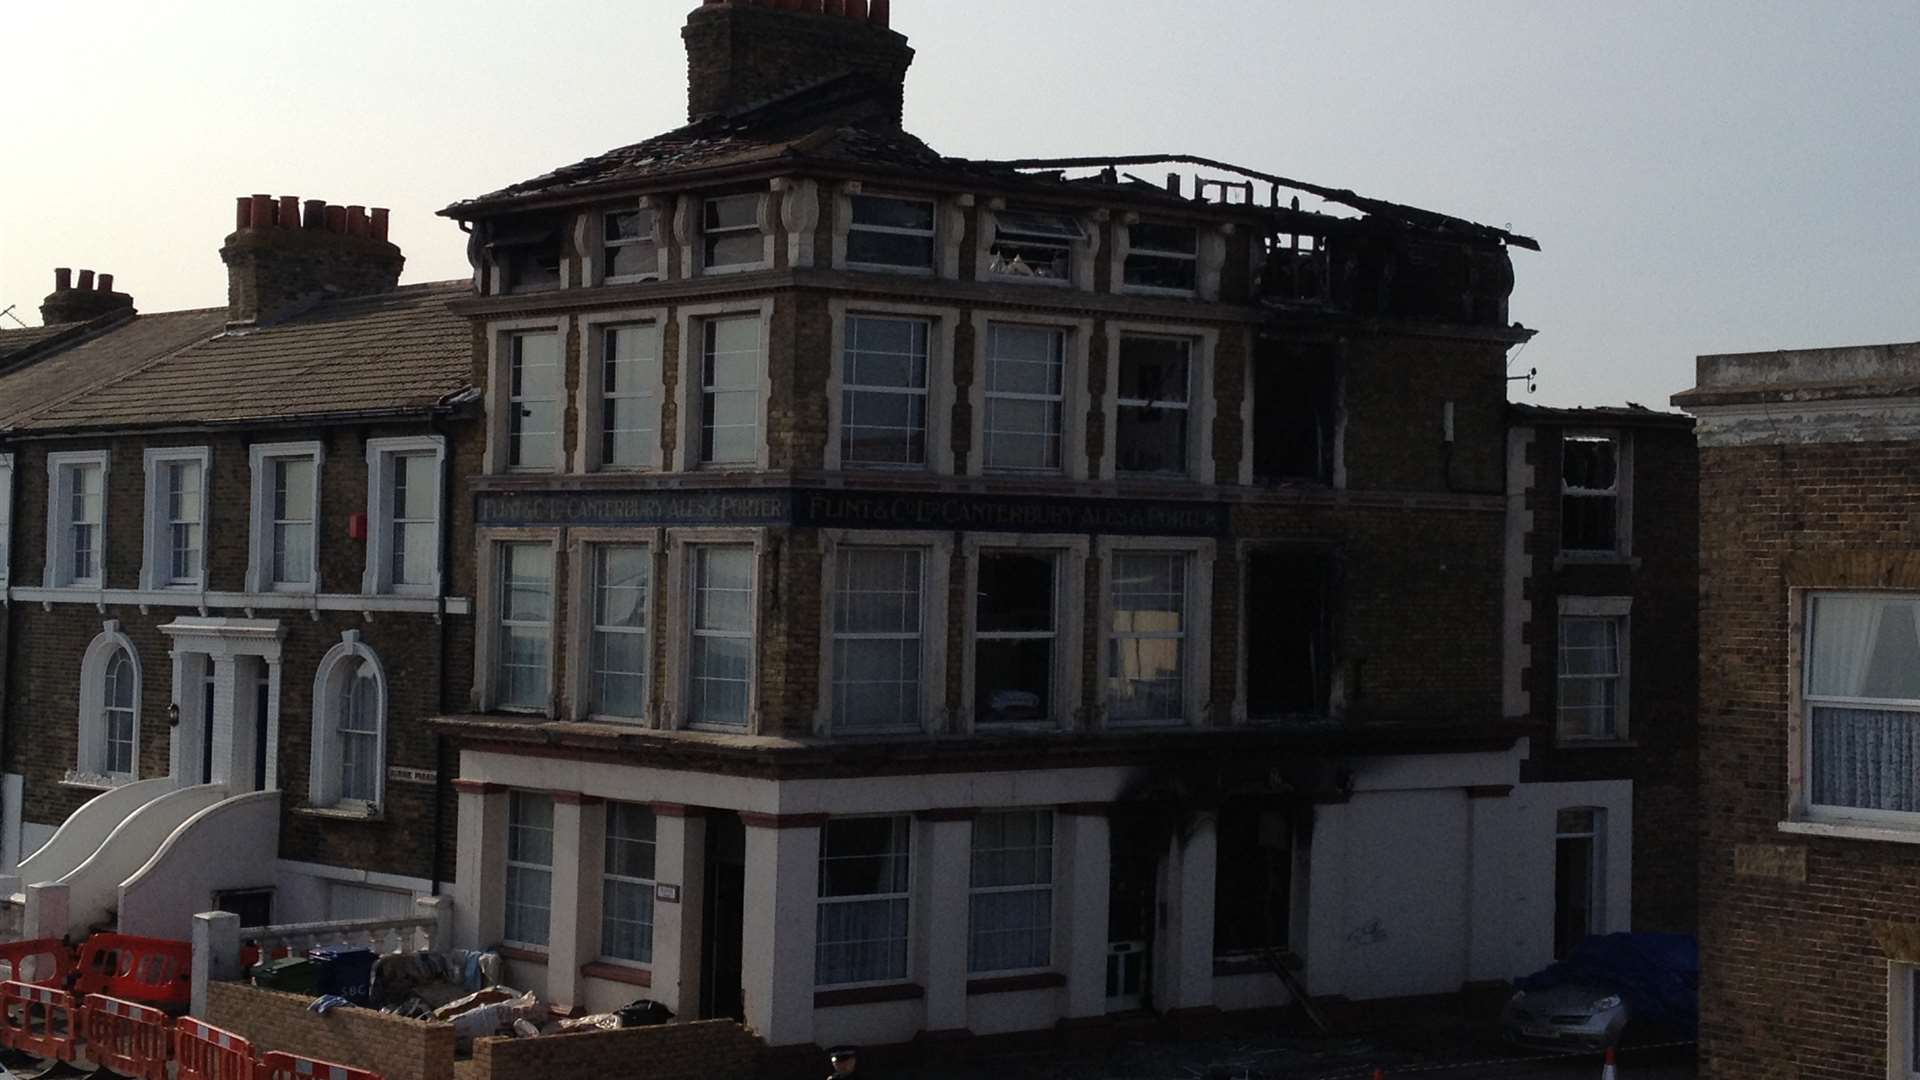 The roof of the building in Sheerness was ravaged by fire